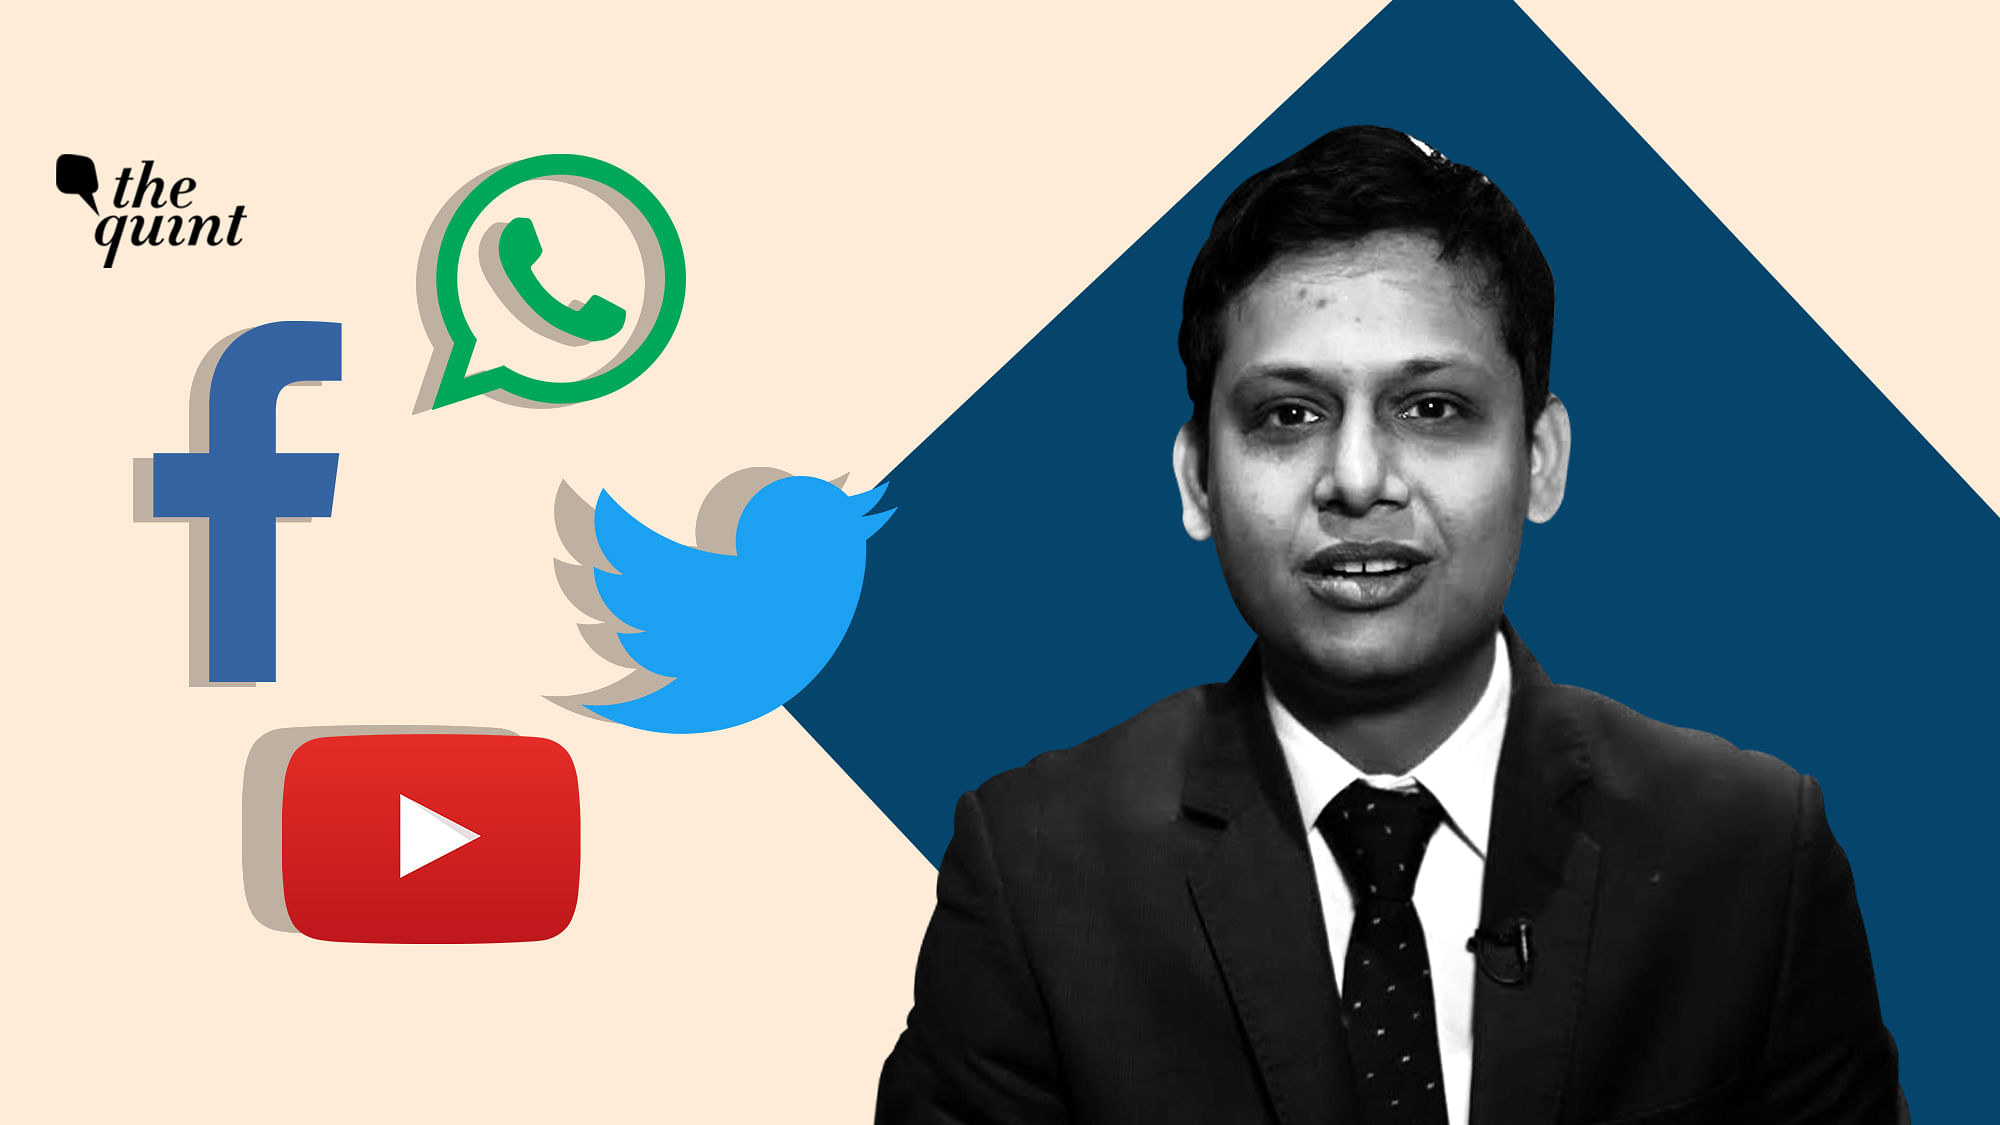 The government’s new social media regulation injured our right to speech and privacy, Apar Gupta explains